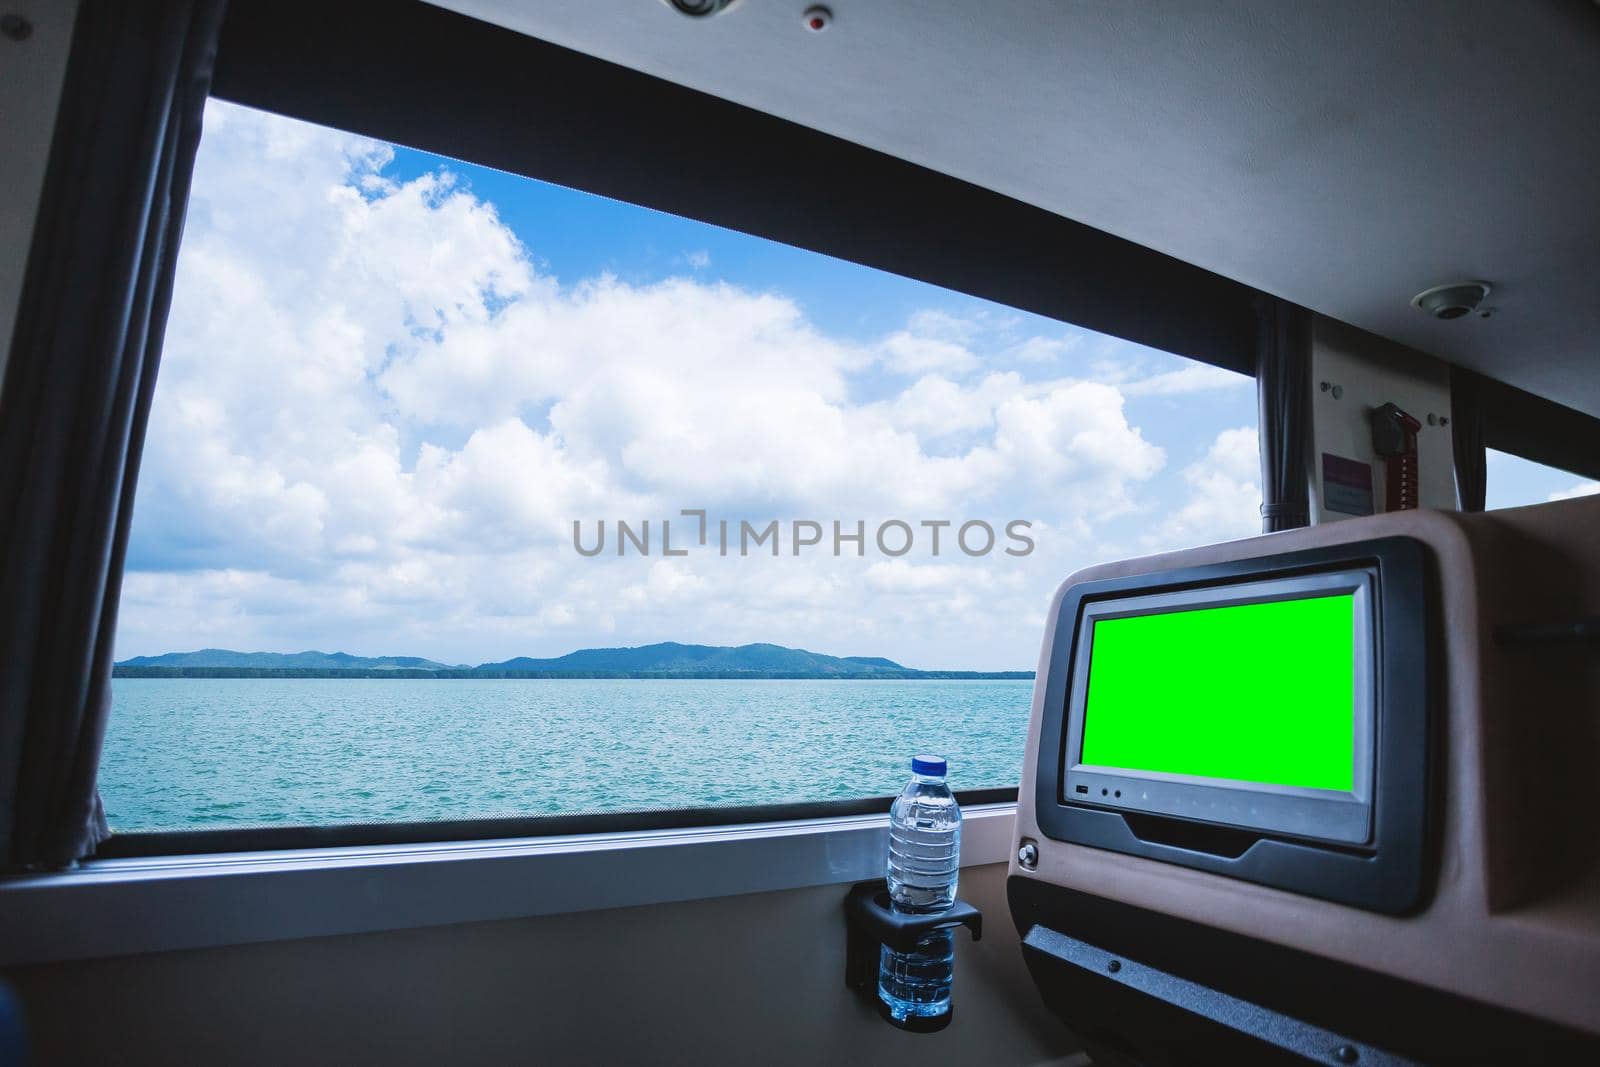 Inside of the bus which has LCD screen blank rear seat for entertainment with a bottle of water and window view of Beautiful landscape nature the sea with sky cloud, Figure tourism road trip concept.